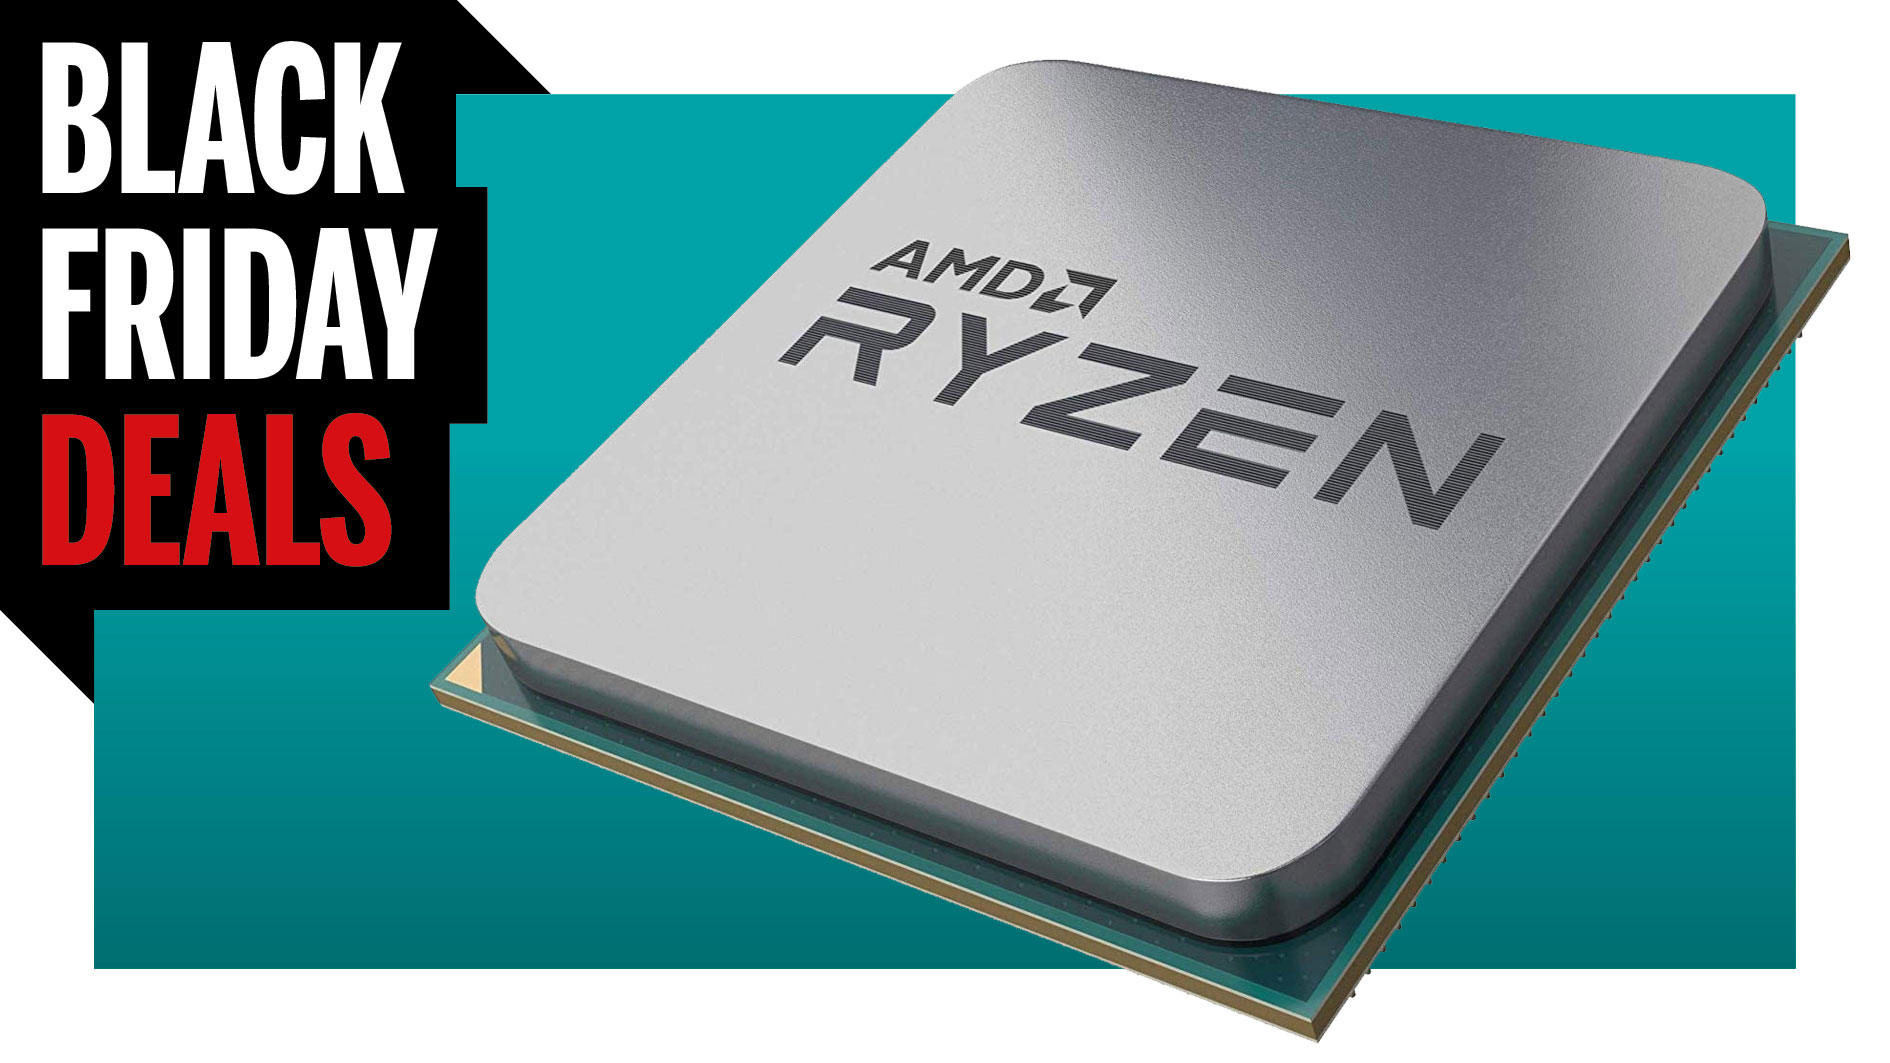  These are the best AMD Black Friday deals we've seen so far 